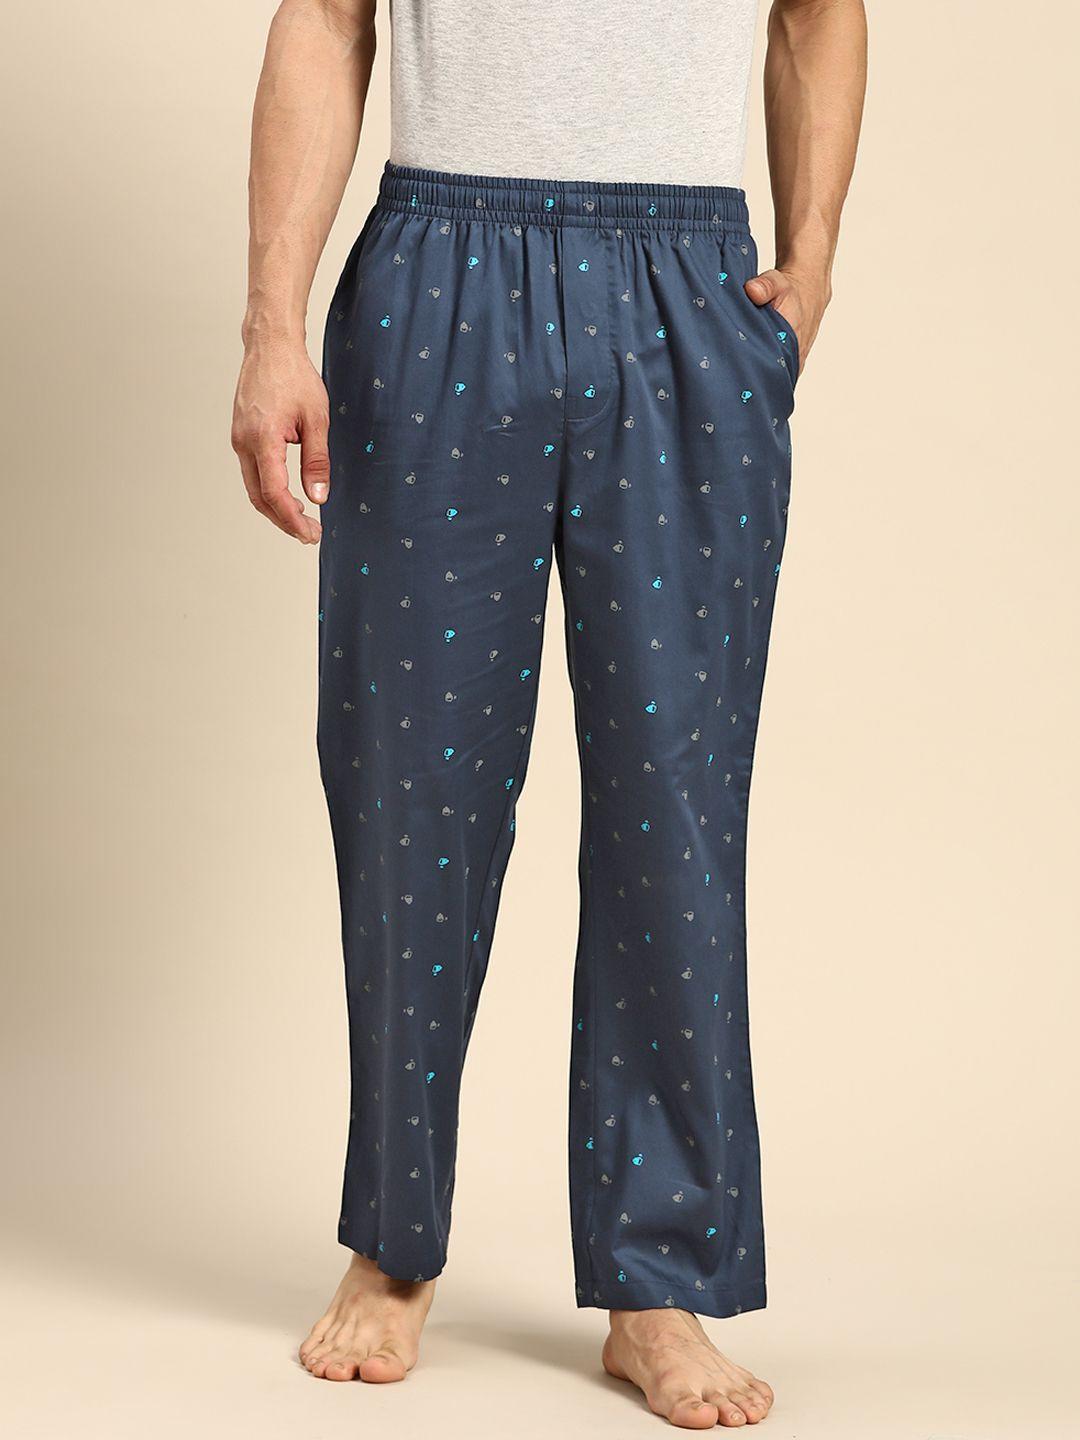 jockey men assorted pure super combed cotton printed lounge pants